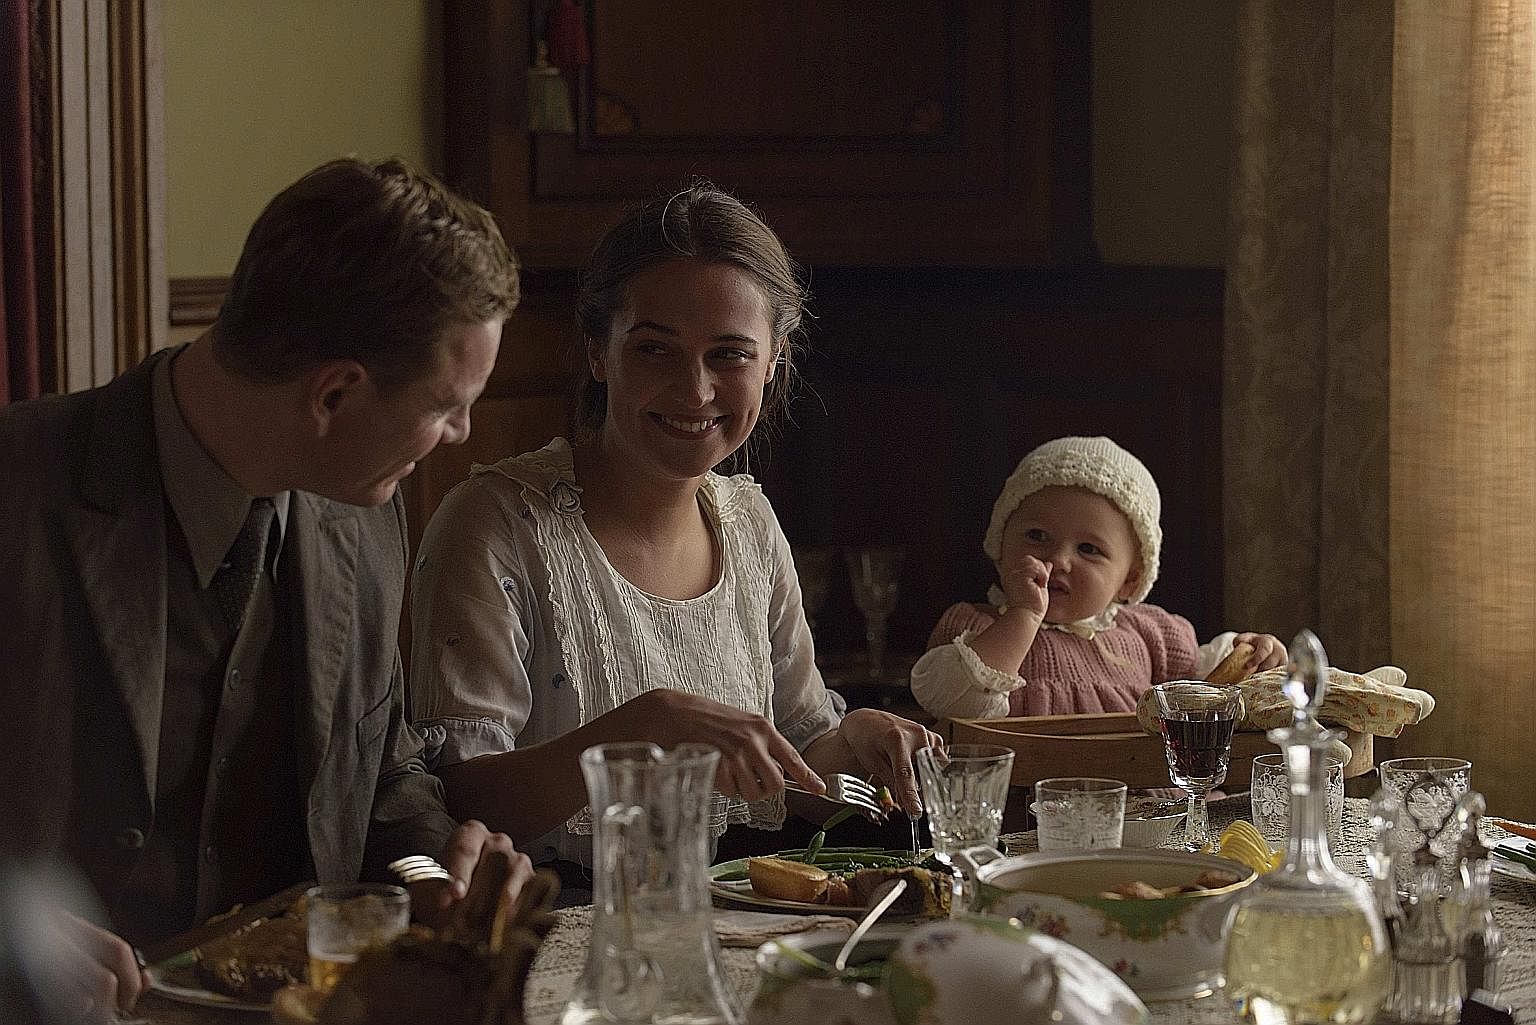 Michael Fassbender and Alicia Vikander (both above) in The Light Between Oceans; and Anya Taylor-Joy and James McAvoy in Split.